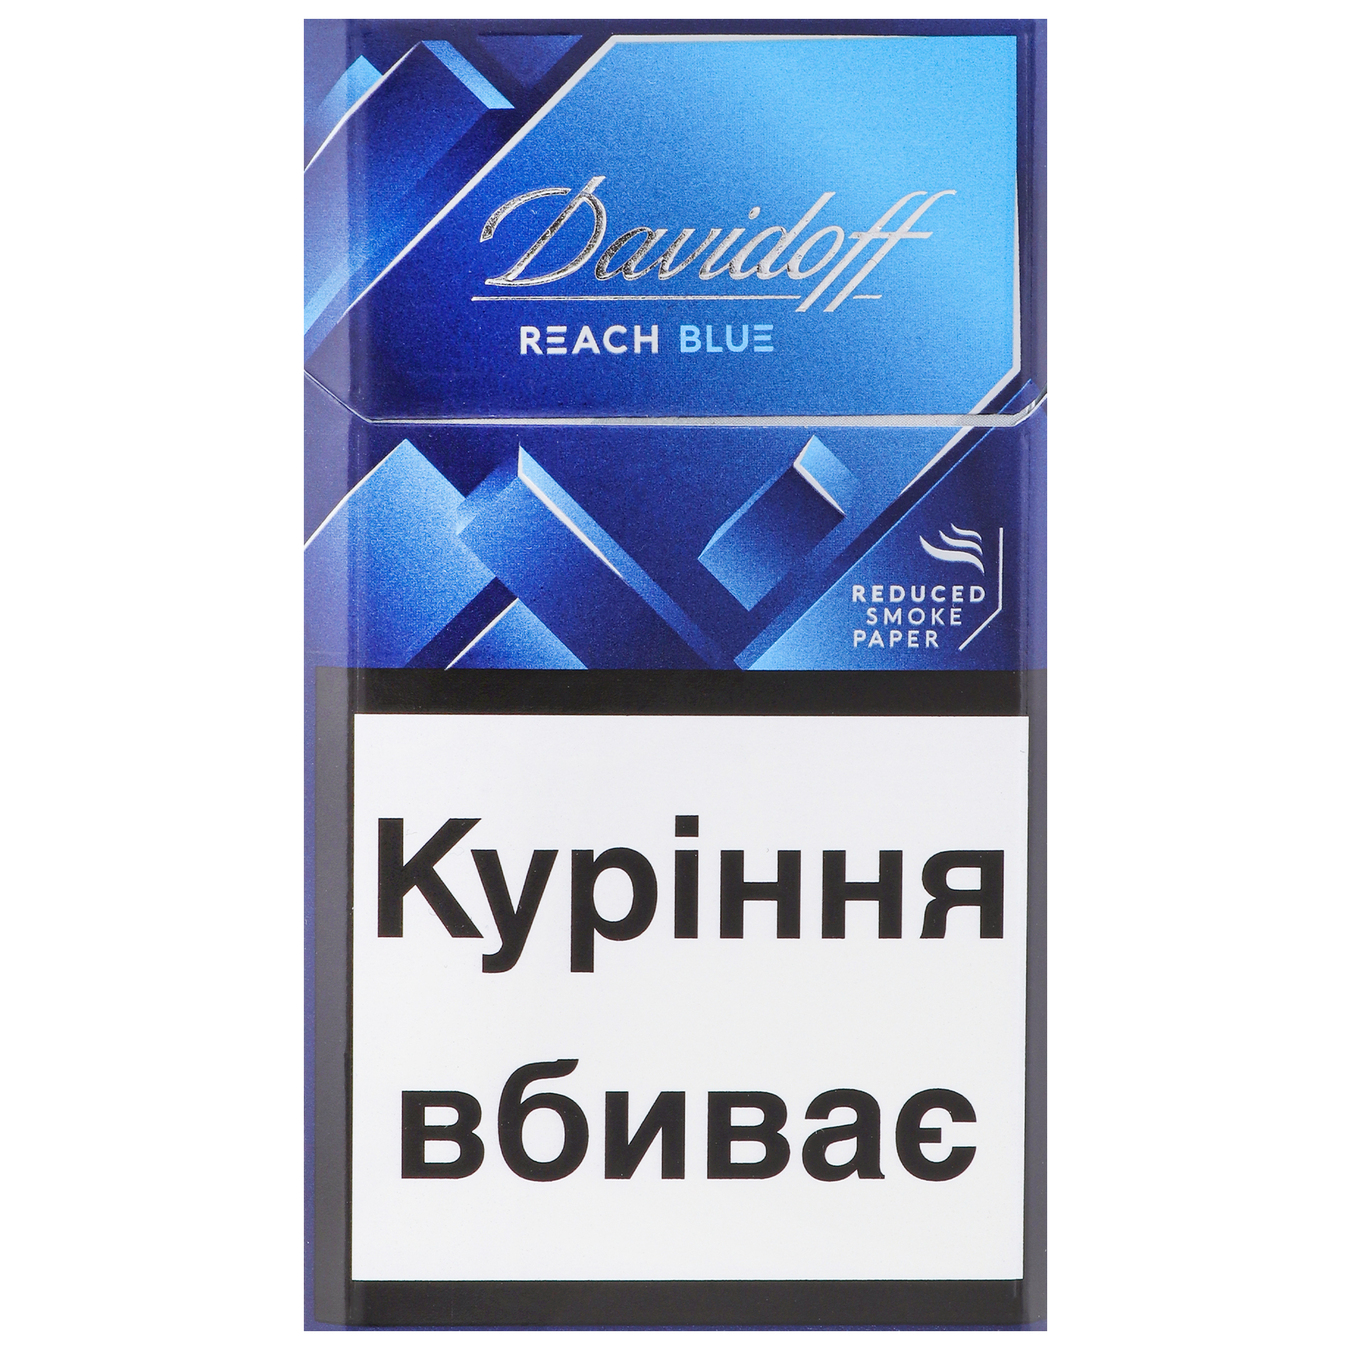 Davidoff Reach BLUE cigarettes 20 pcs (the price is indicated without excise tax)